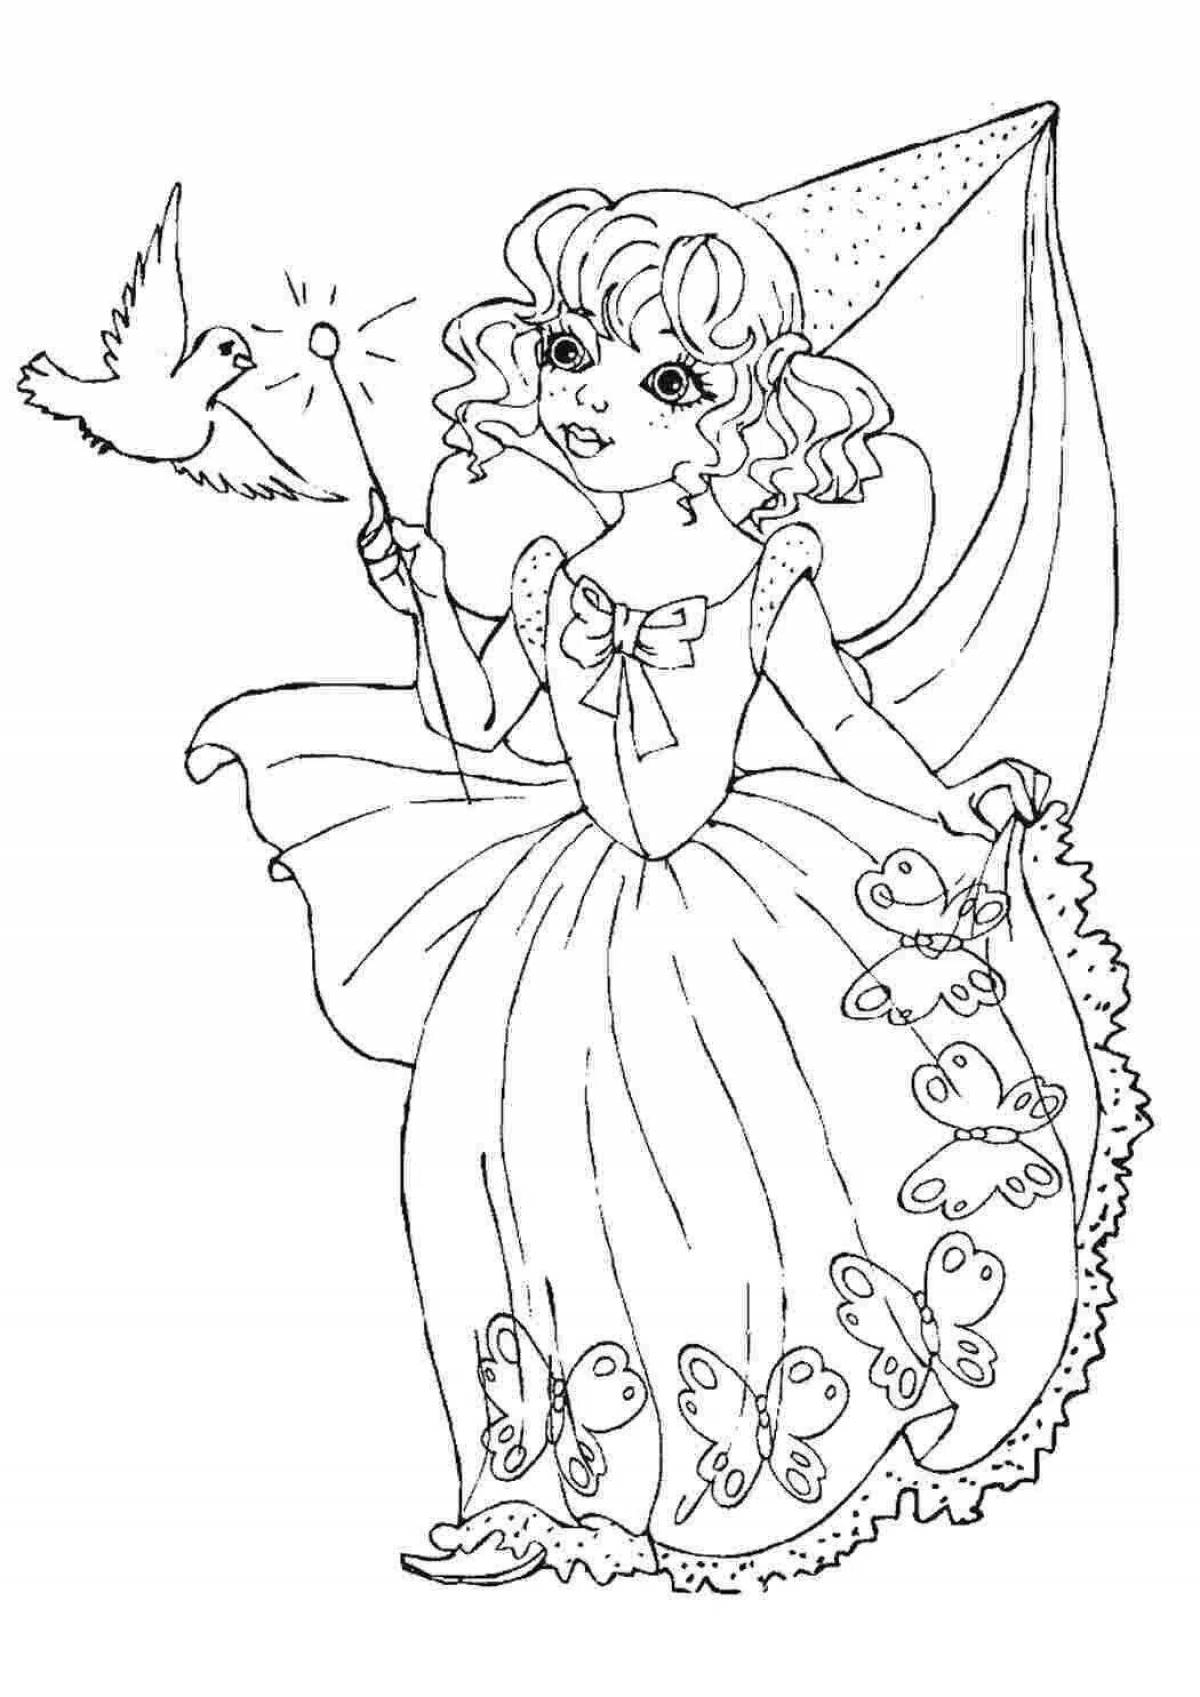 Super mystical coloring for girls